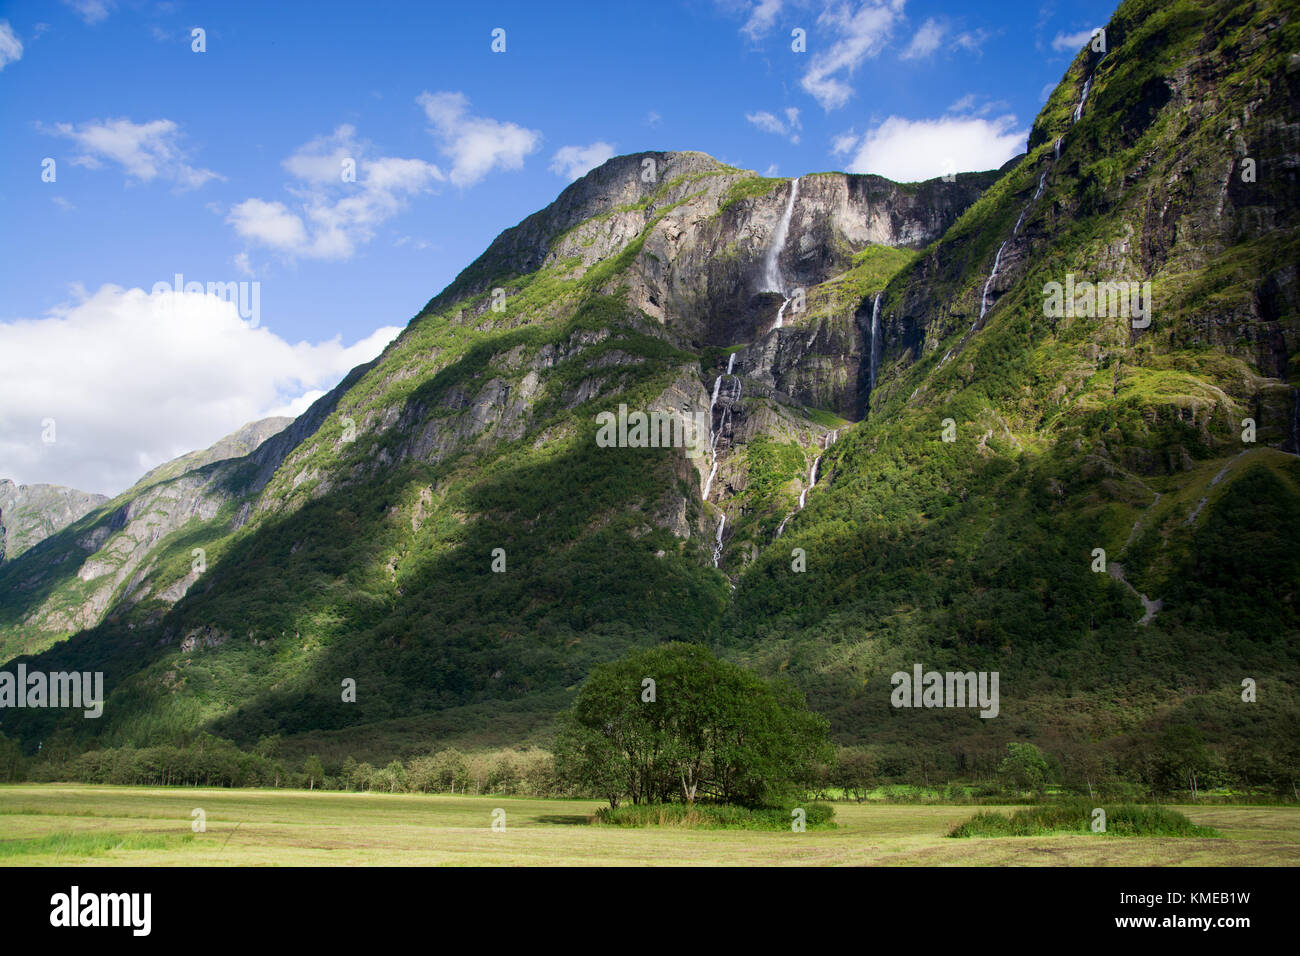 Gudvangen is a village in the municipality of Aurland in Sogn og Fjordane county, Norway. Stock Photo